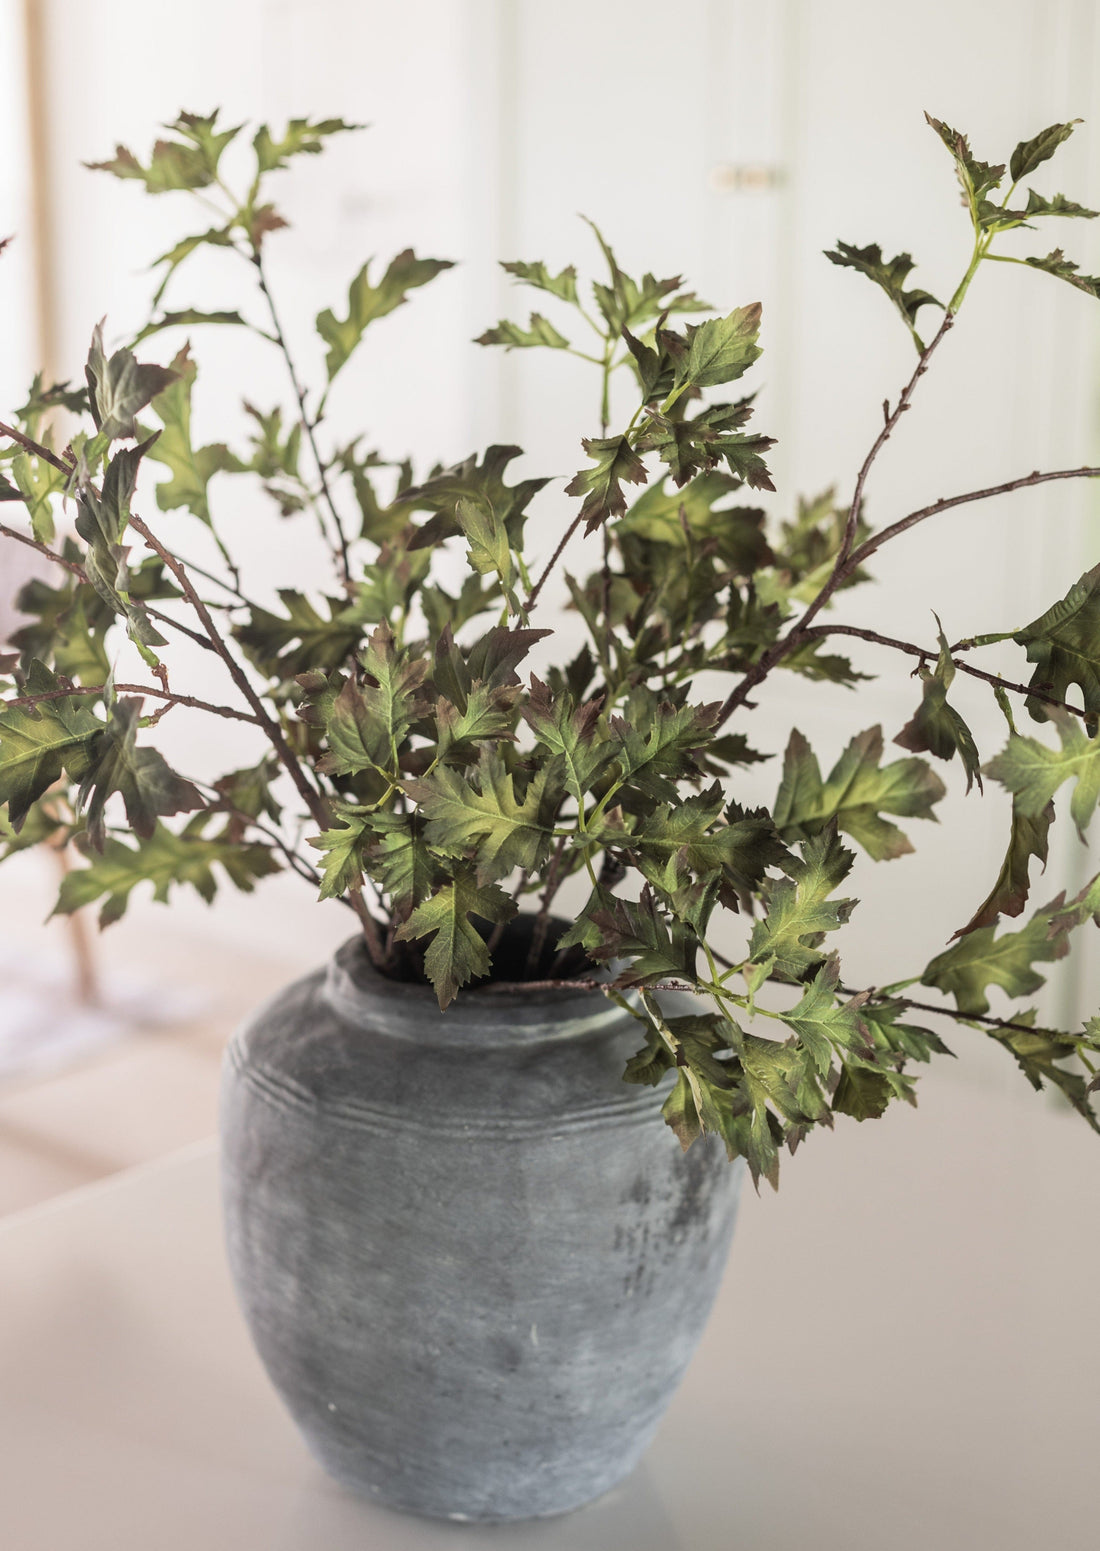 Faux Hawthorn Leaf Branches Styled in Rustic Concrete Vase